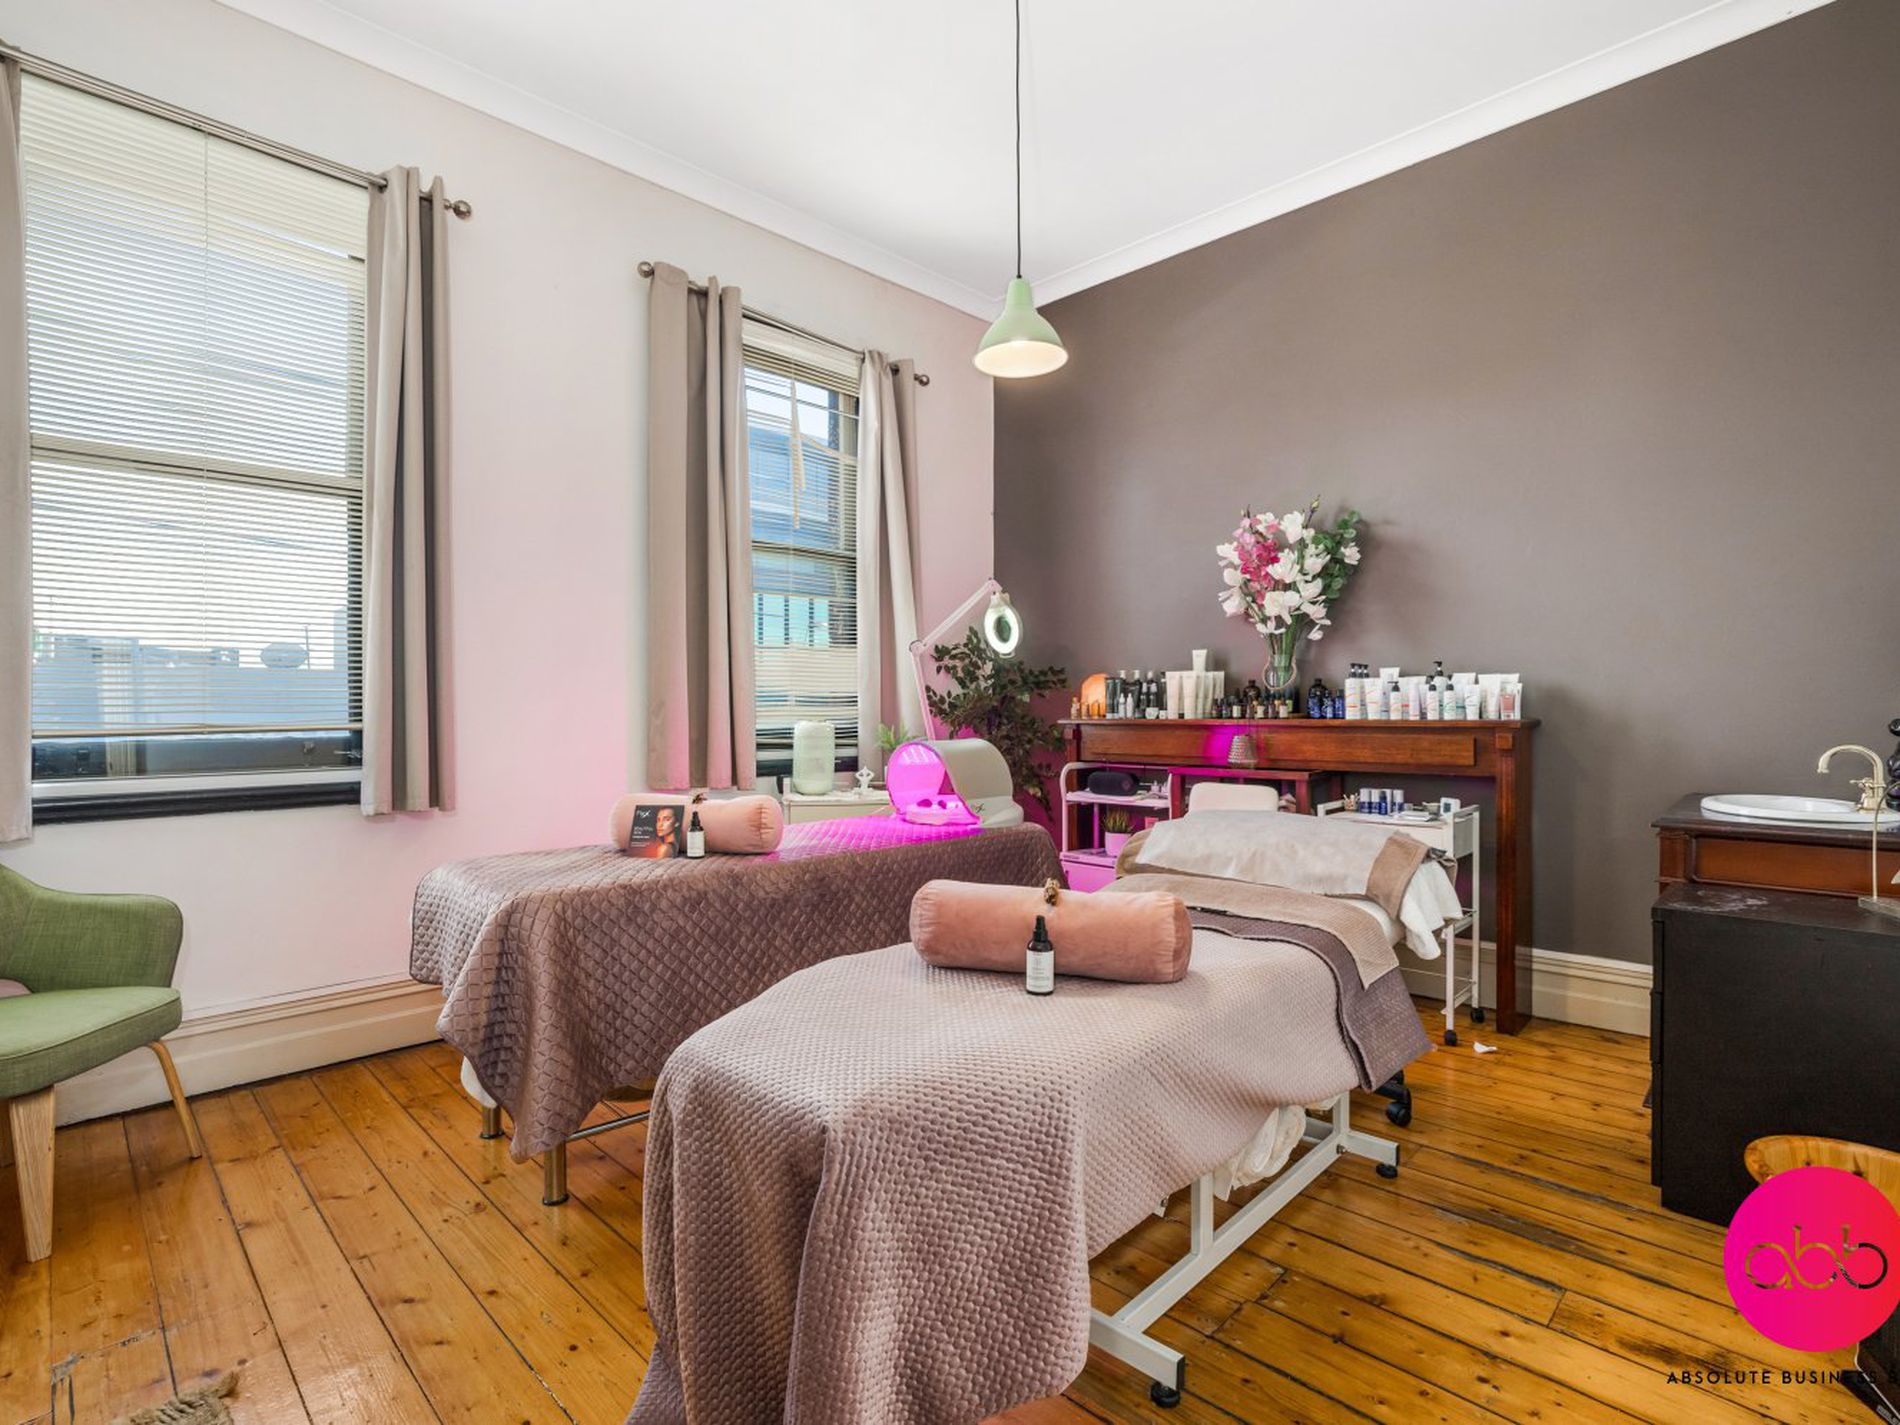 Superb 5 Day Hair with Beauty Salon Business for Sale City Fringe
